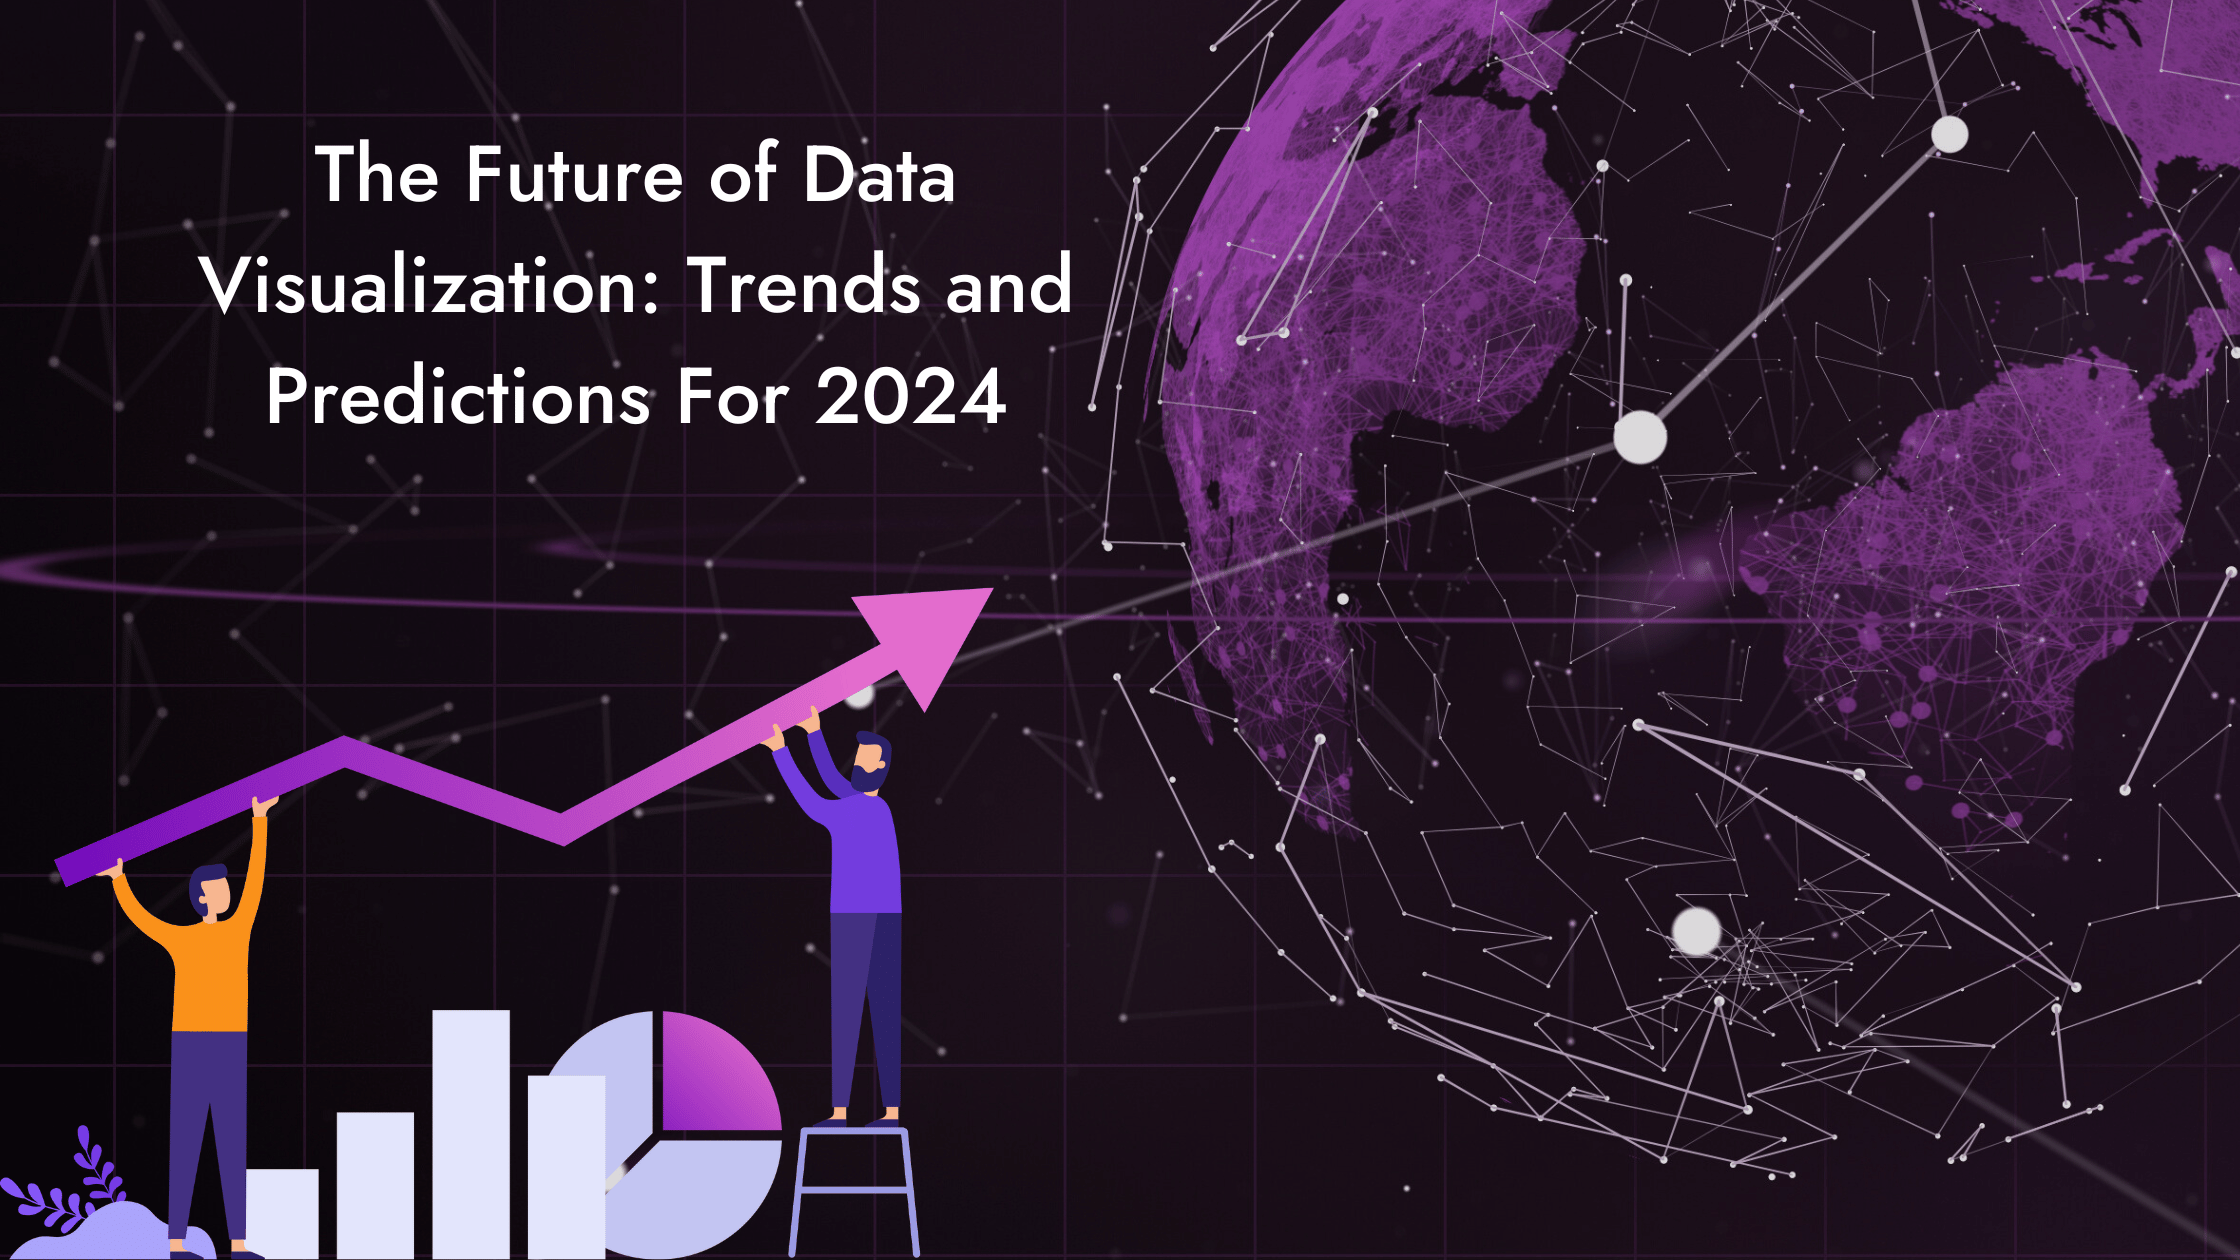 The Future of Data Visualization: Trends and Predictions For 2024